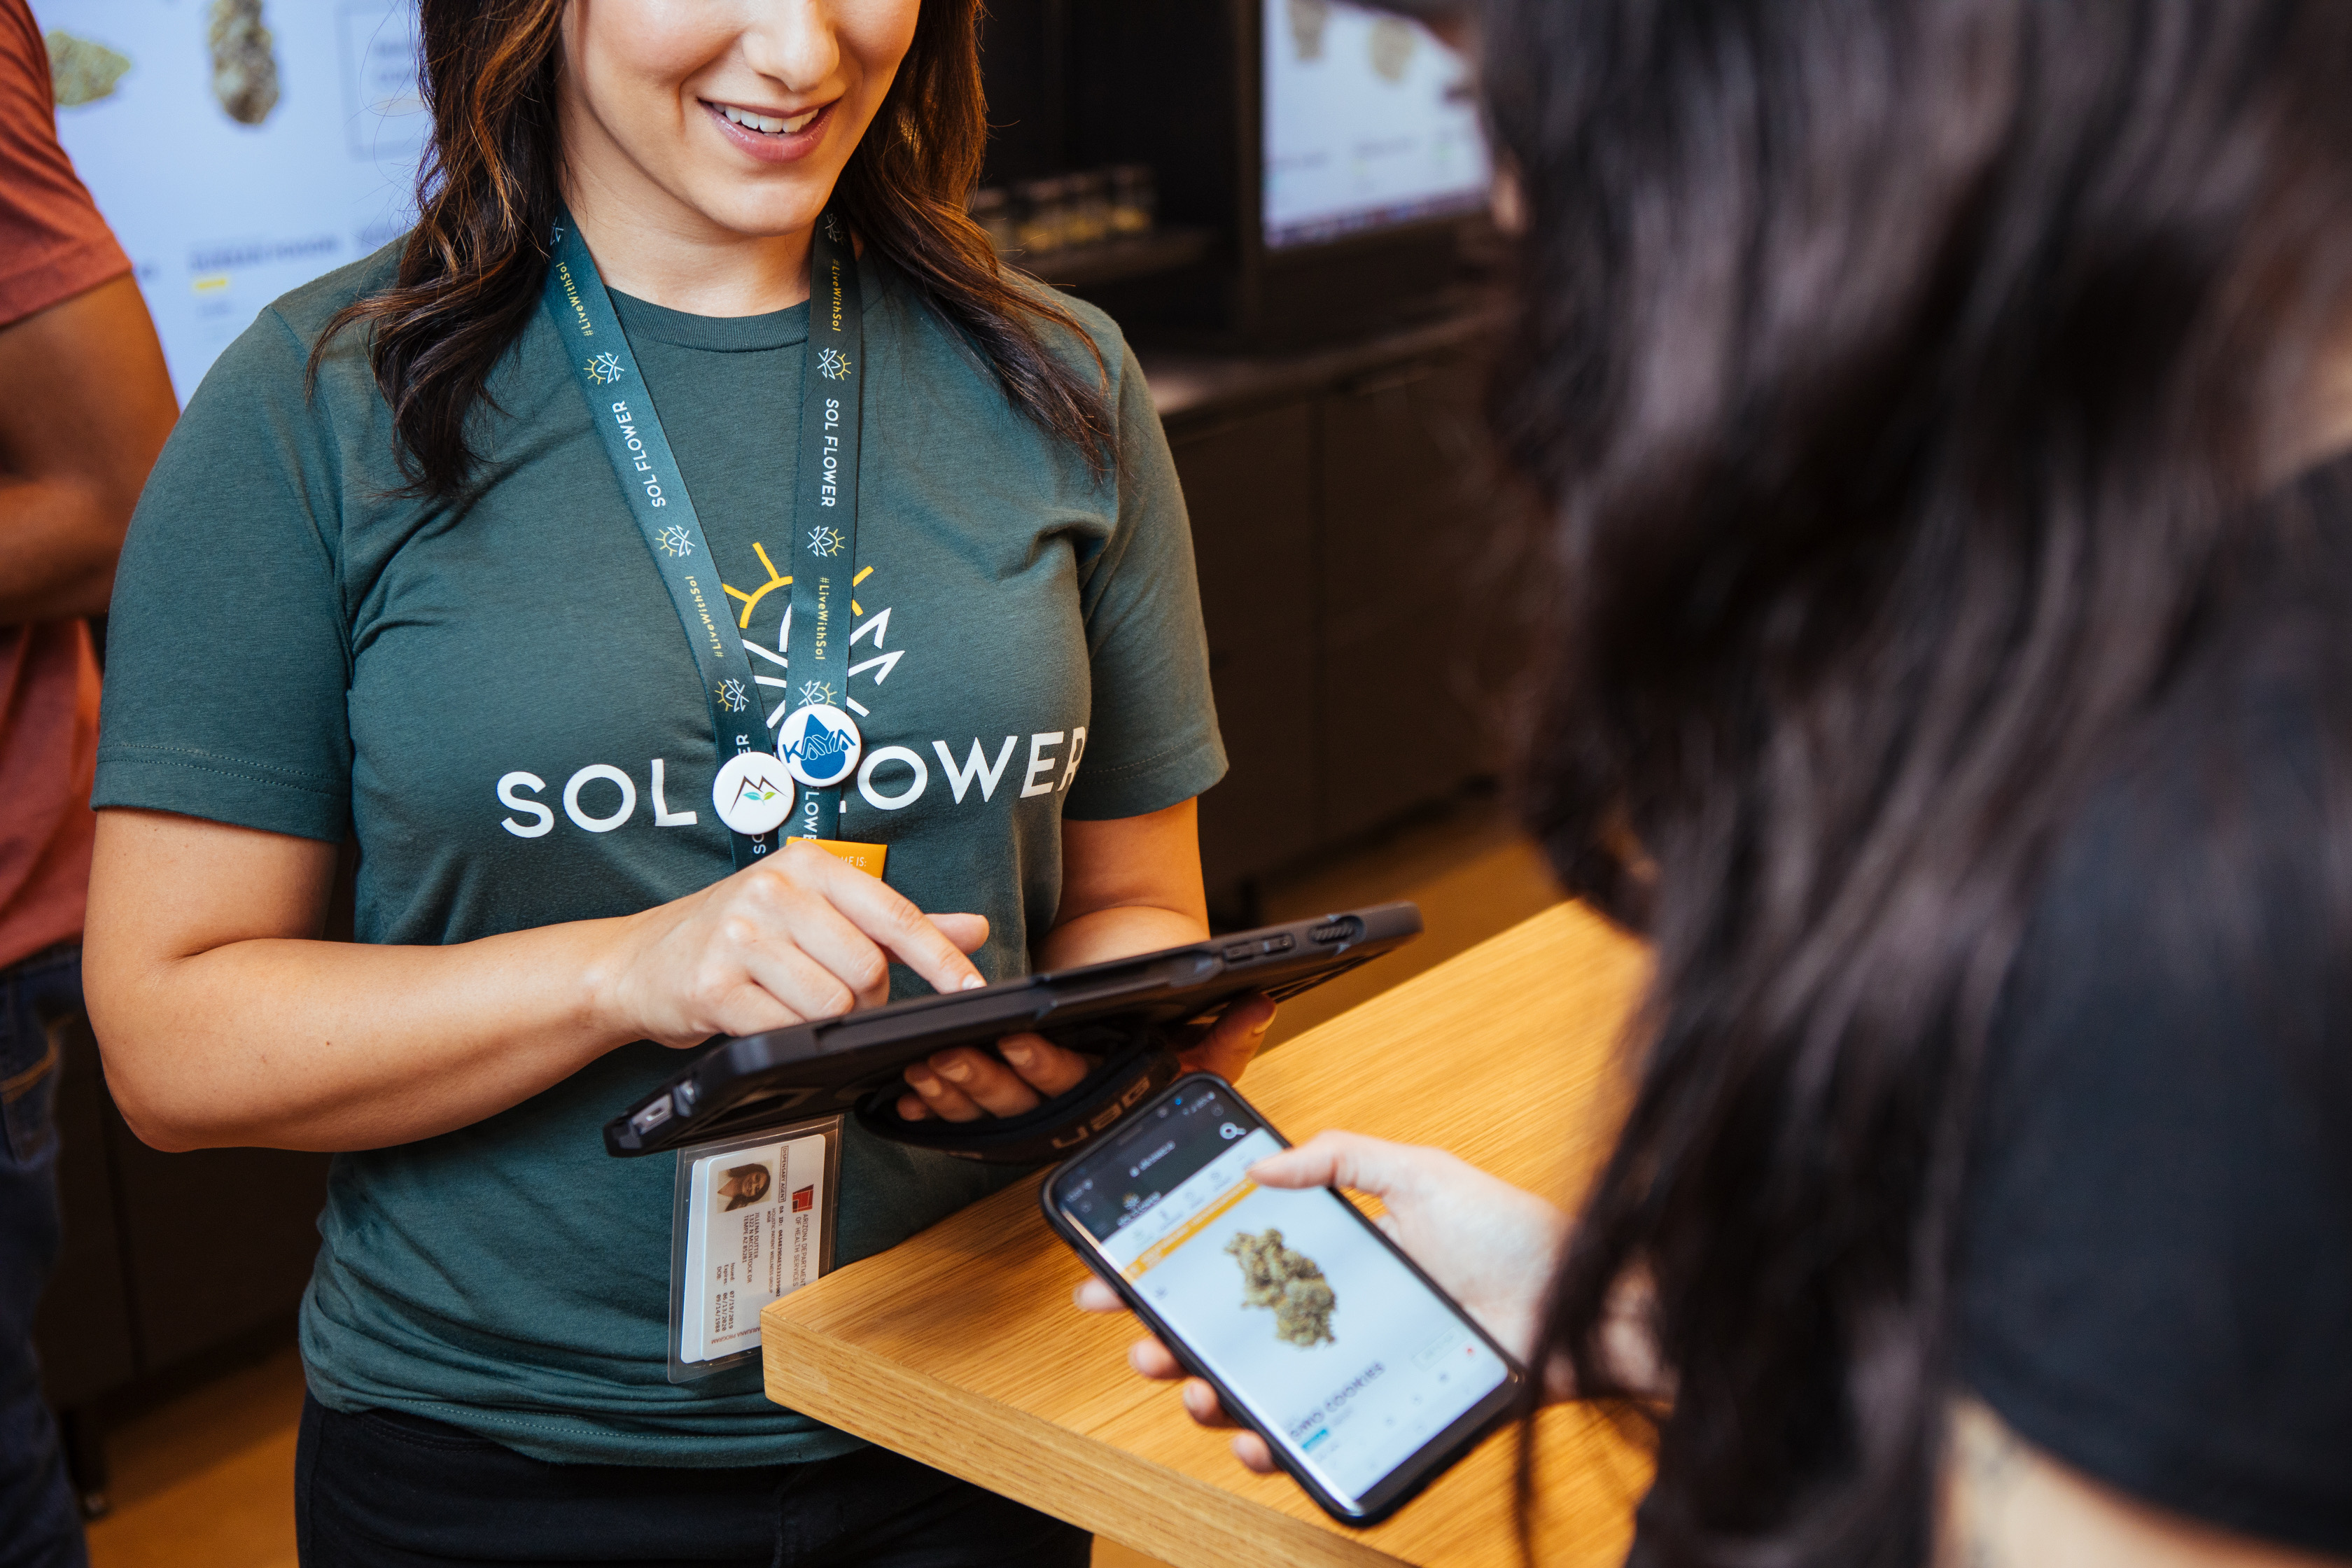 Medical cannabis patients have access to craft flower, premium concentrates, full-flavored edibles, industry-leading vape pens and cartridges, and high-performance tinctures and topical at Sol Flower.